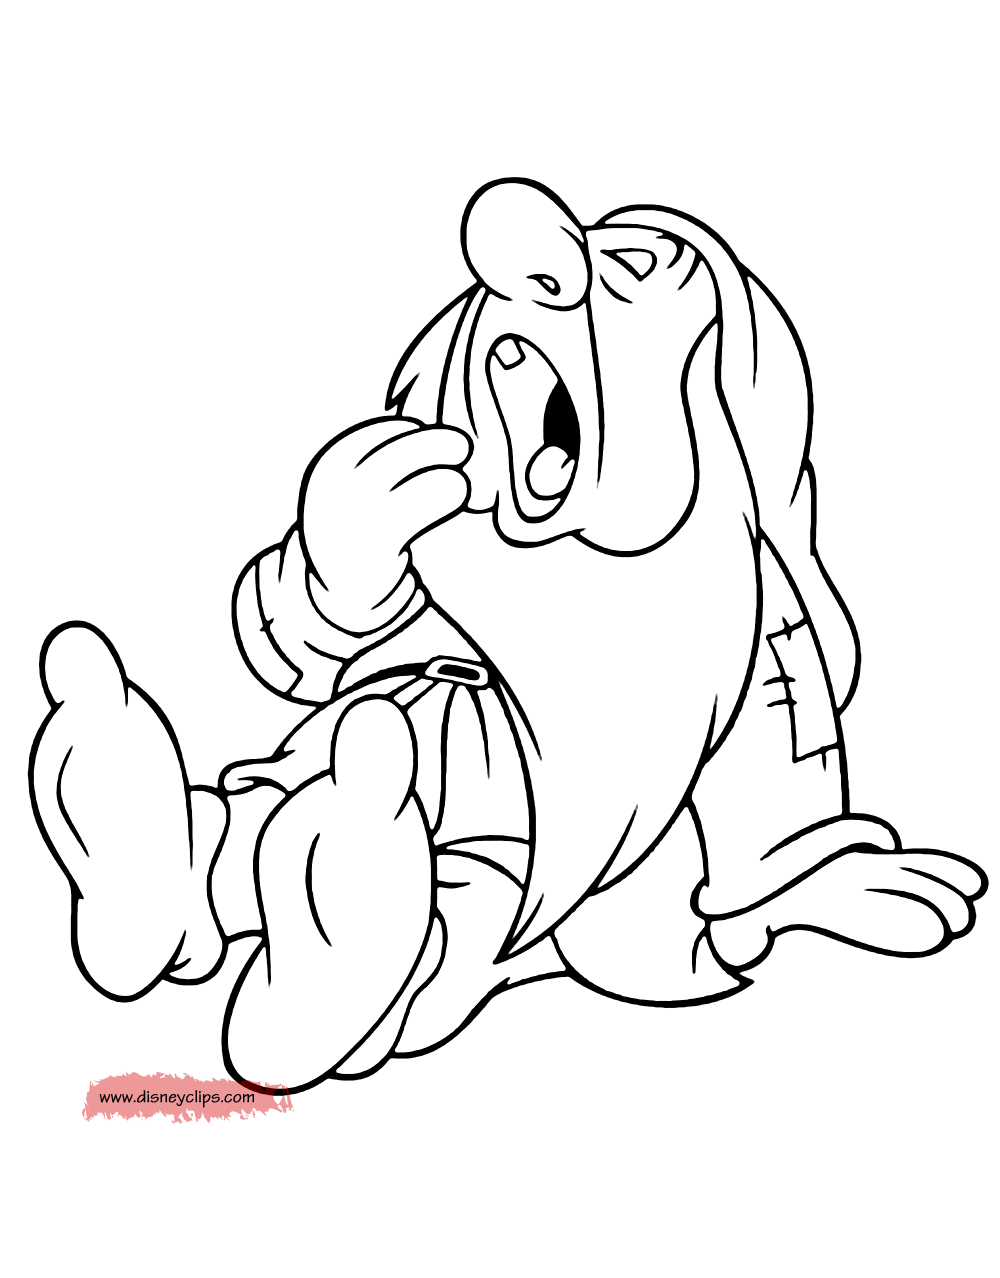 Snow White and the Seven Dwarfs Coloring Pages 3 | Disney ...